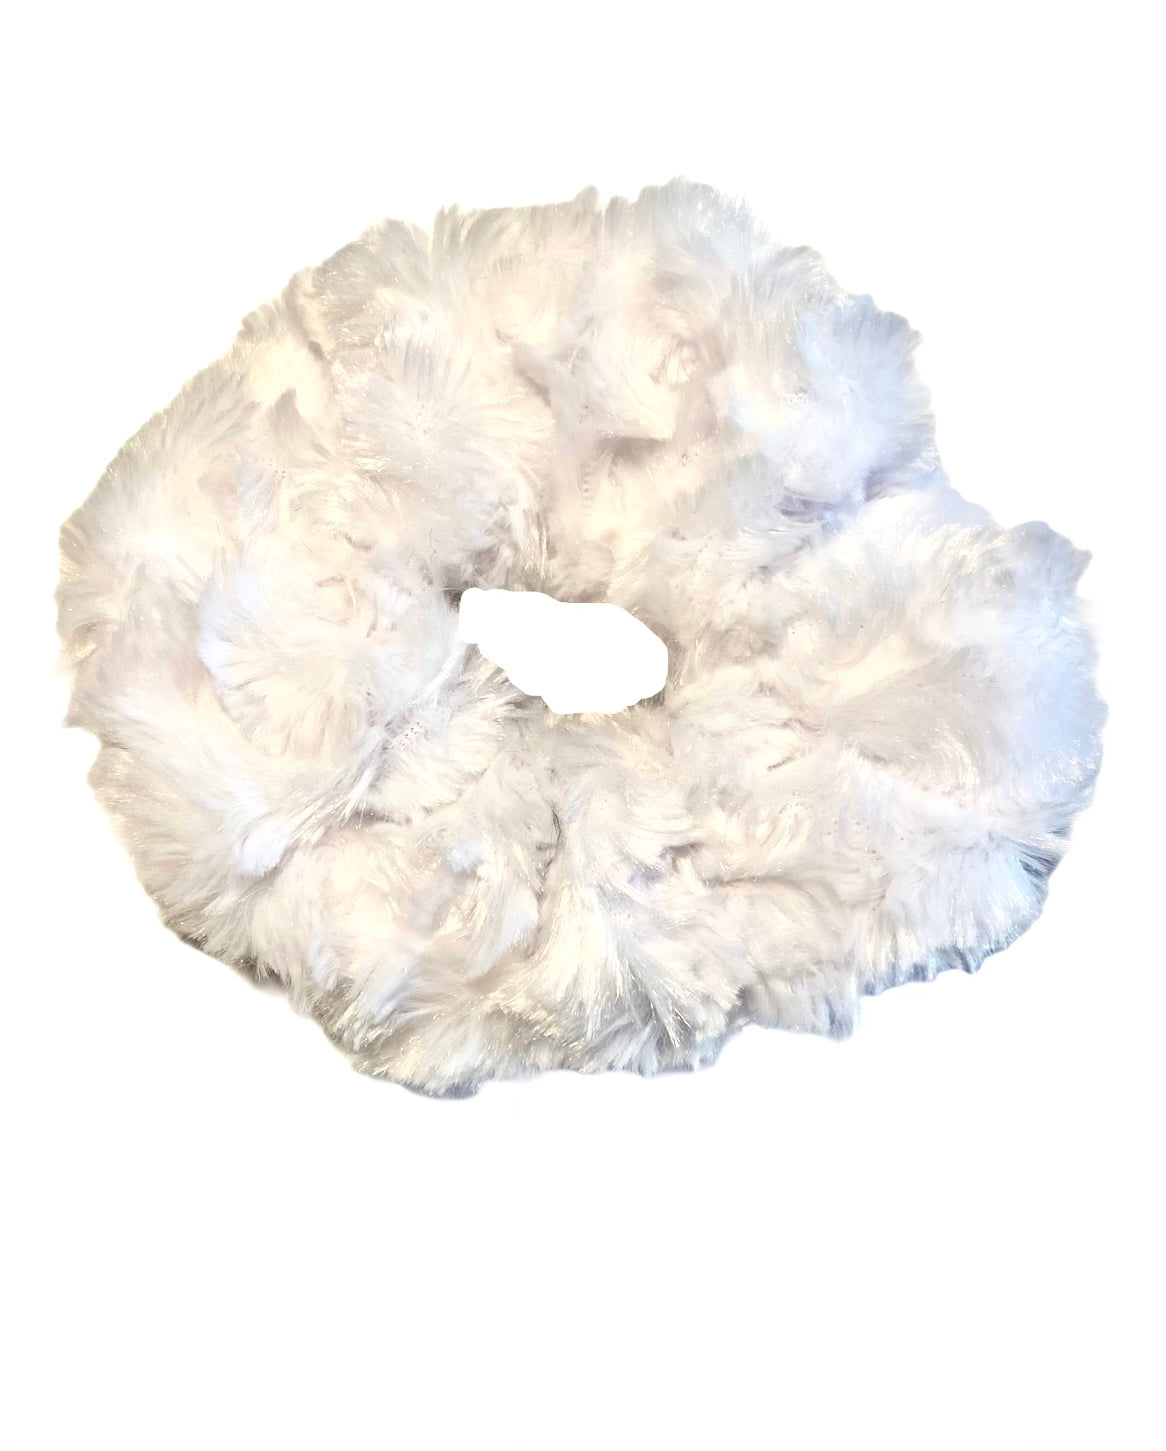 Tied Together Plush White scrunchie